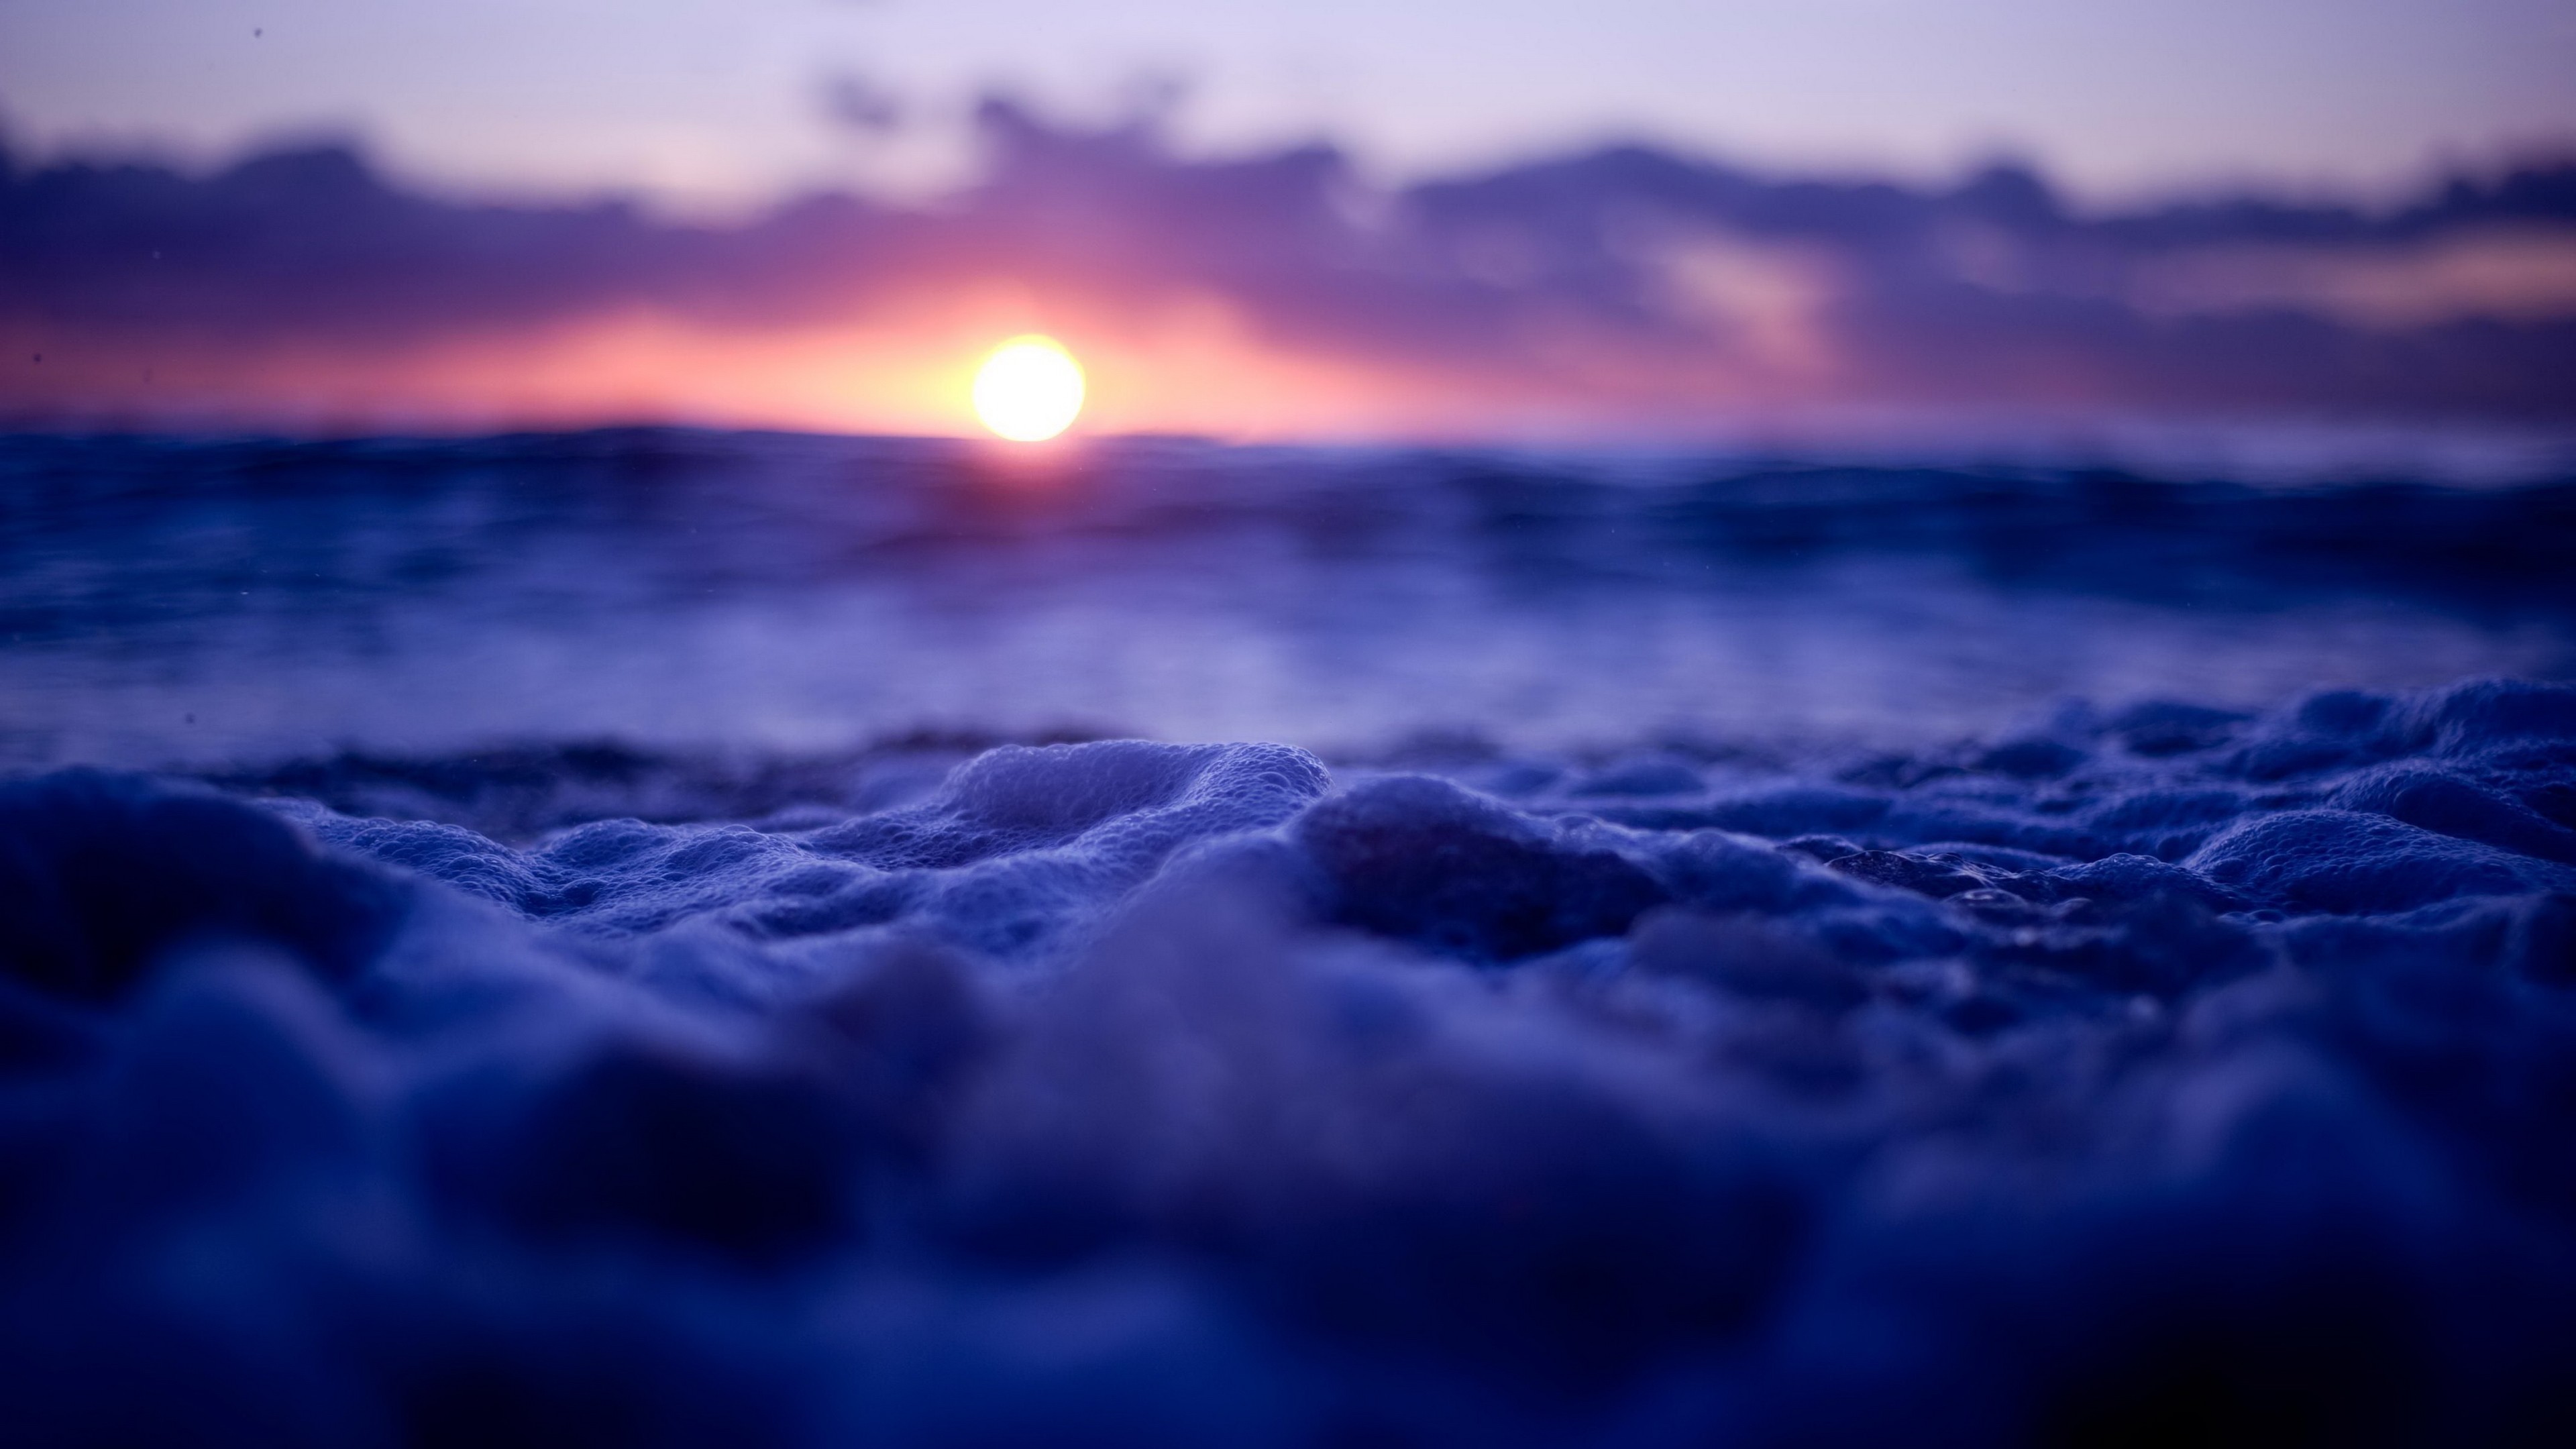 nature, Landscape, Water, Sunset, Bubbles, Sea, Clouds, Depth of field